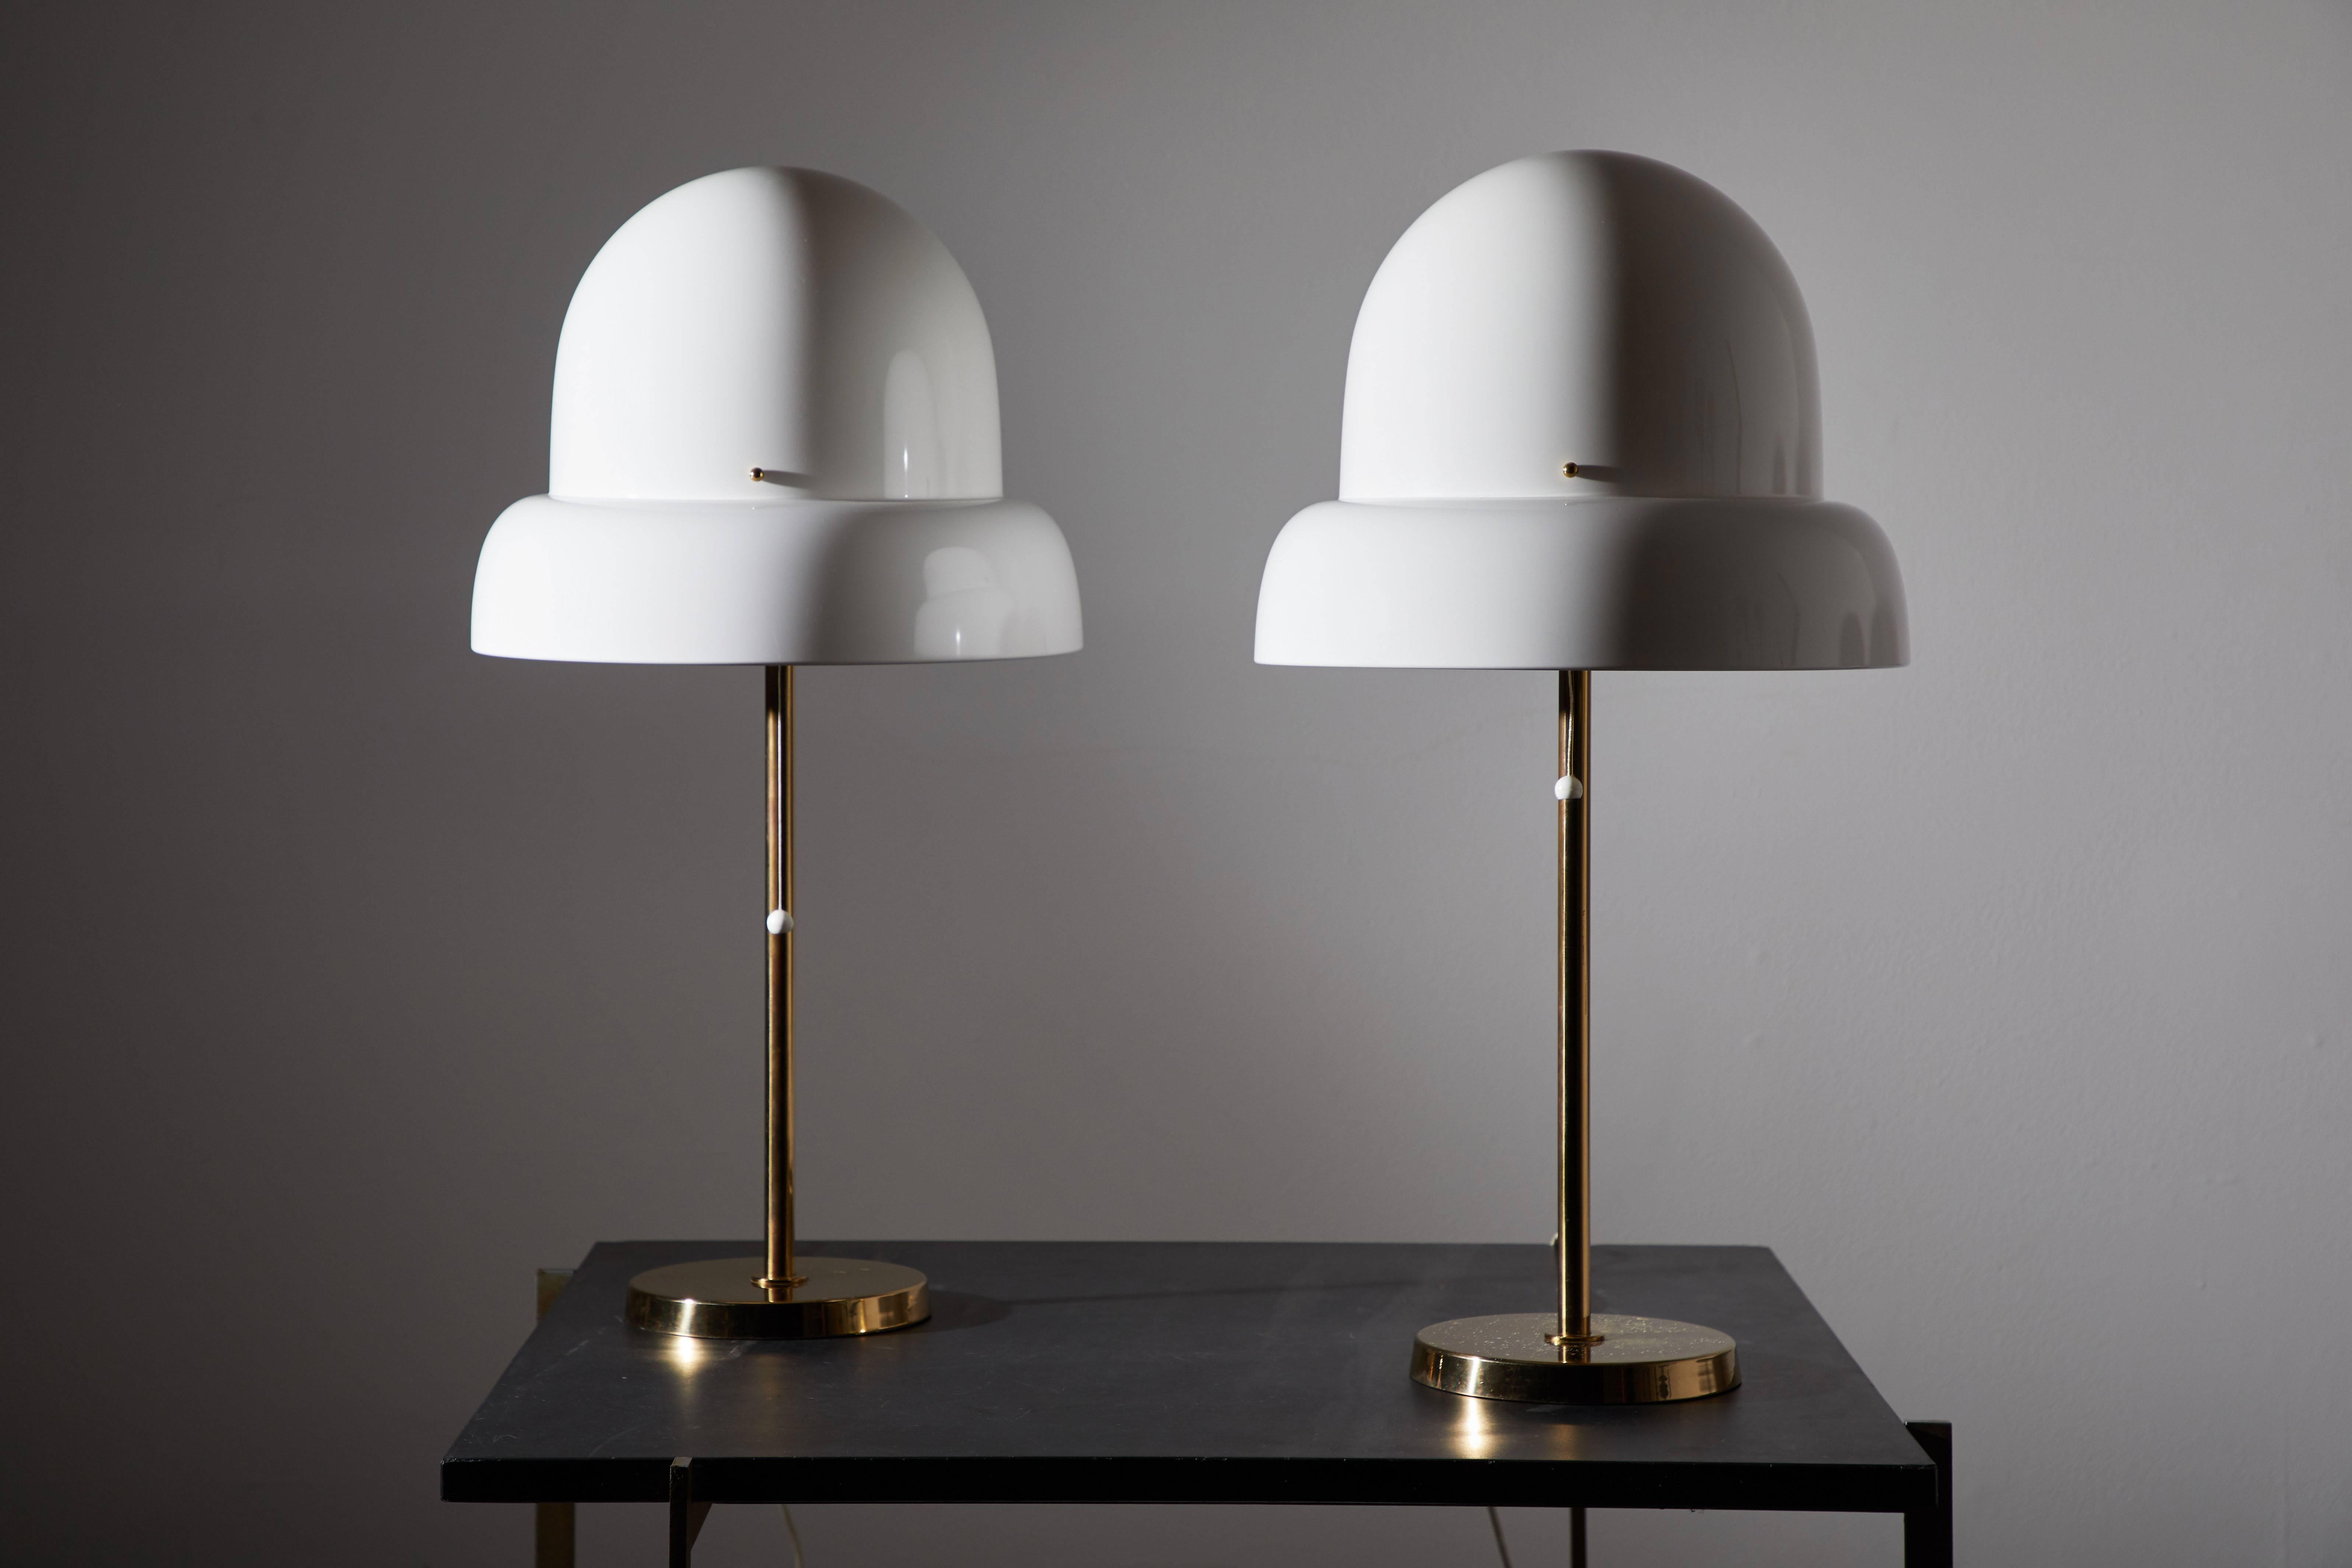 Pair of table lamps by Bergboms. Manufactured in Sweden, circa 1970s. Acrylic shades with brass stems and hardware. Original cords. Each light takes one E27 75w maximum bulb.